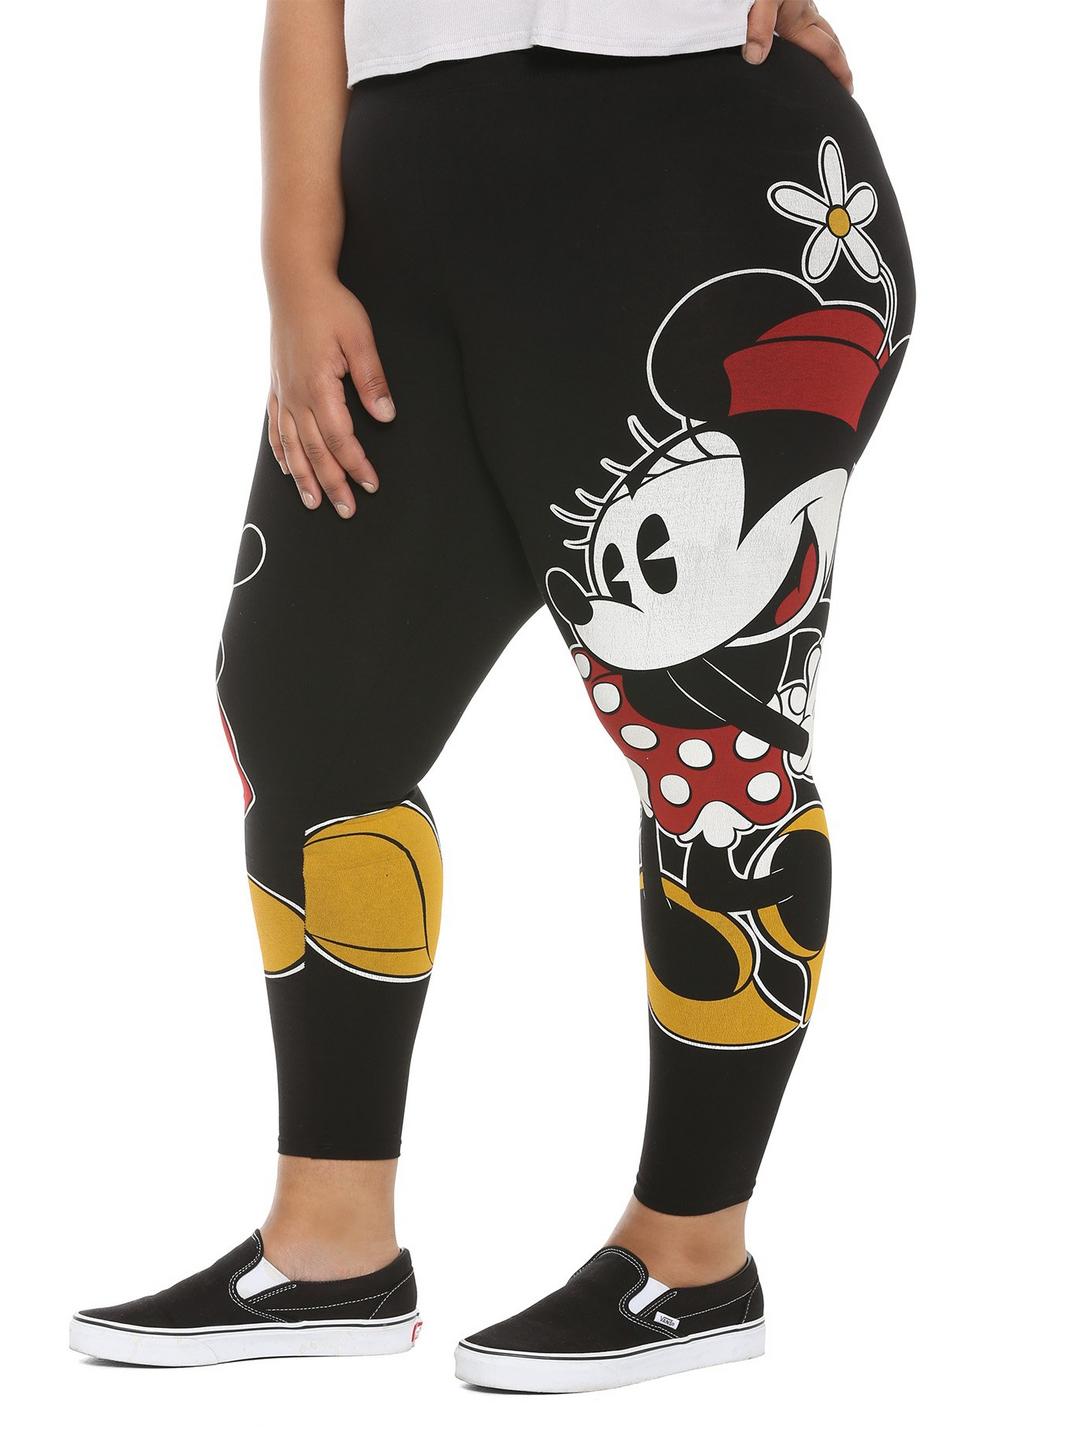 Disney Mickey Mouse & Minnie Mouse Mirrored Leggings Plus Size 